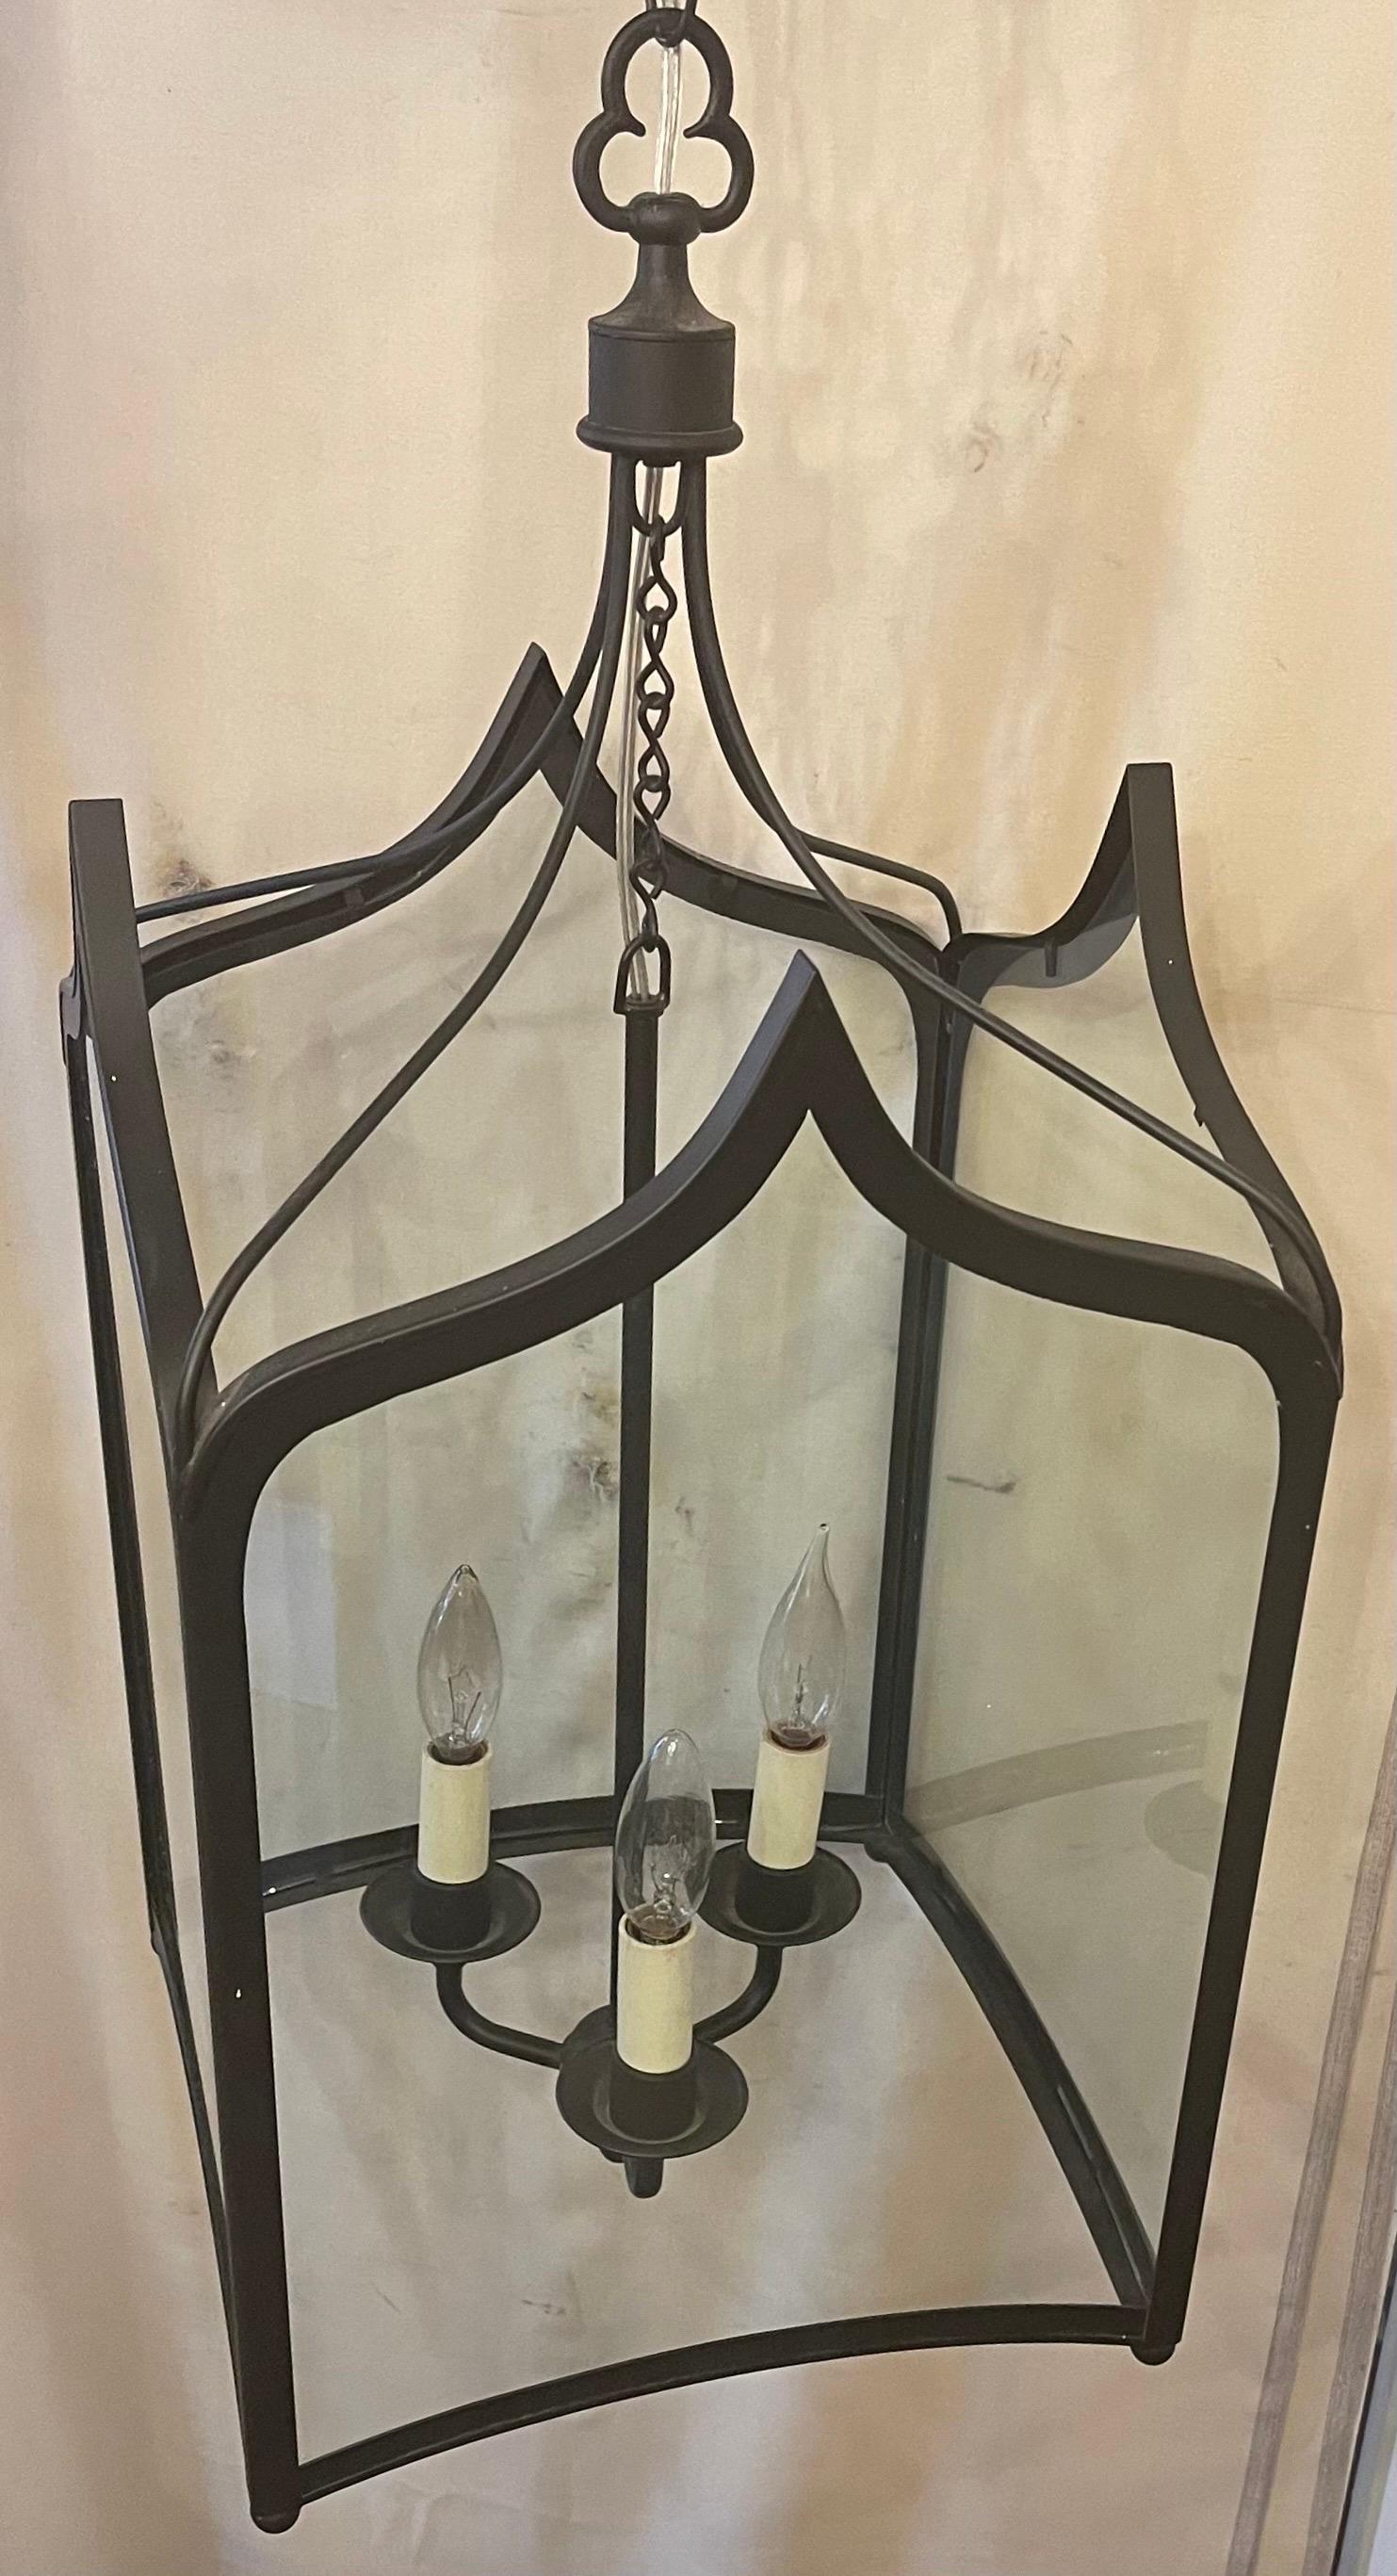 20th Century Wonderful Vaughan Lighting Regency Square Arched Black Iron 3 Lanterns Fixtures For Sale